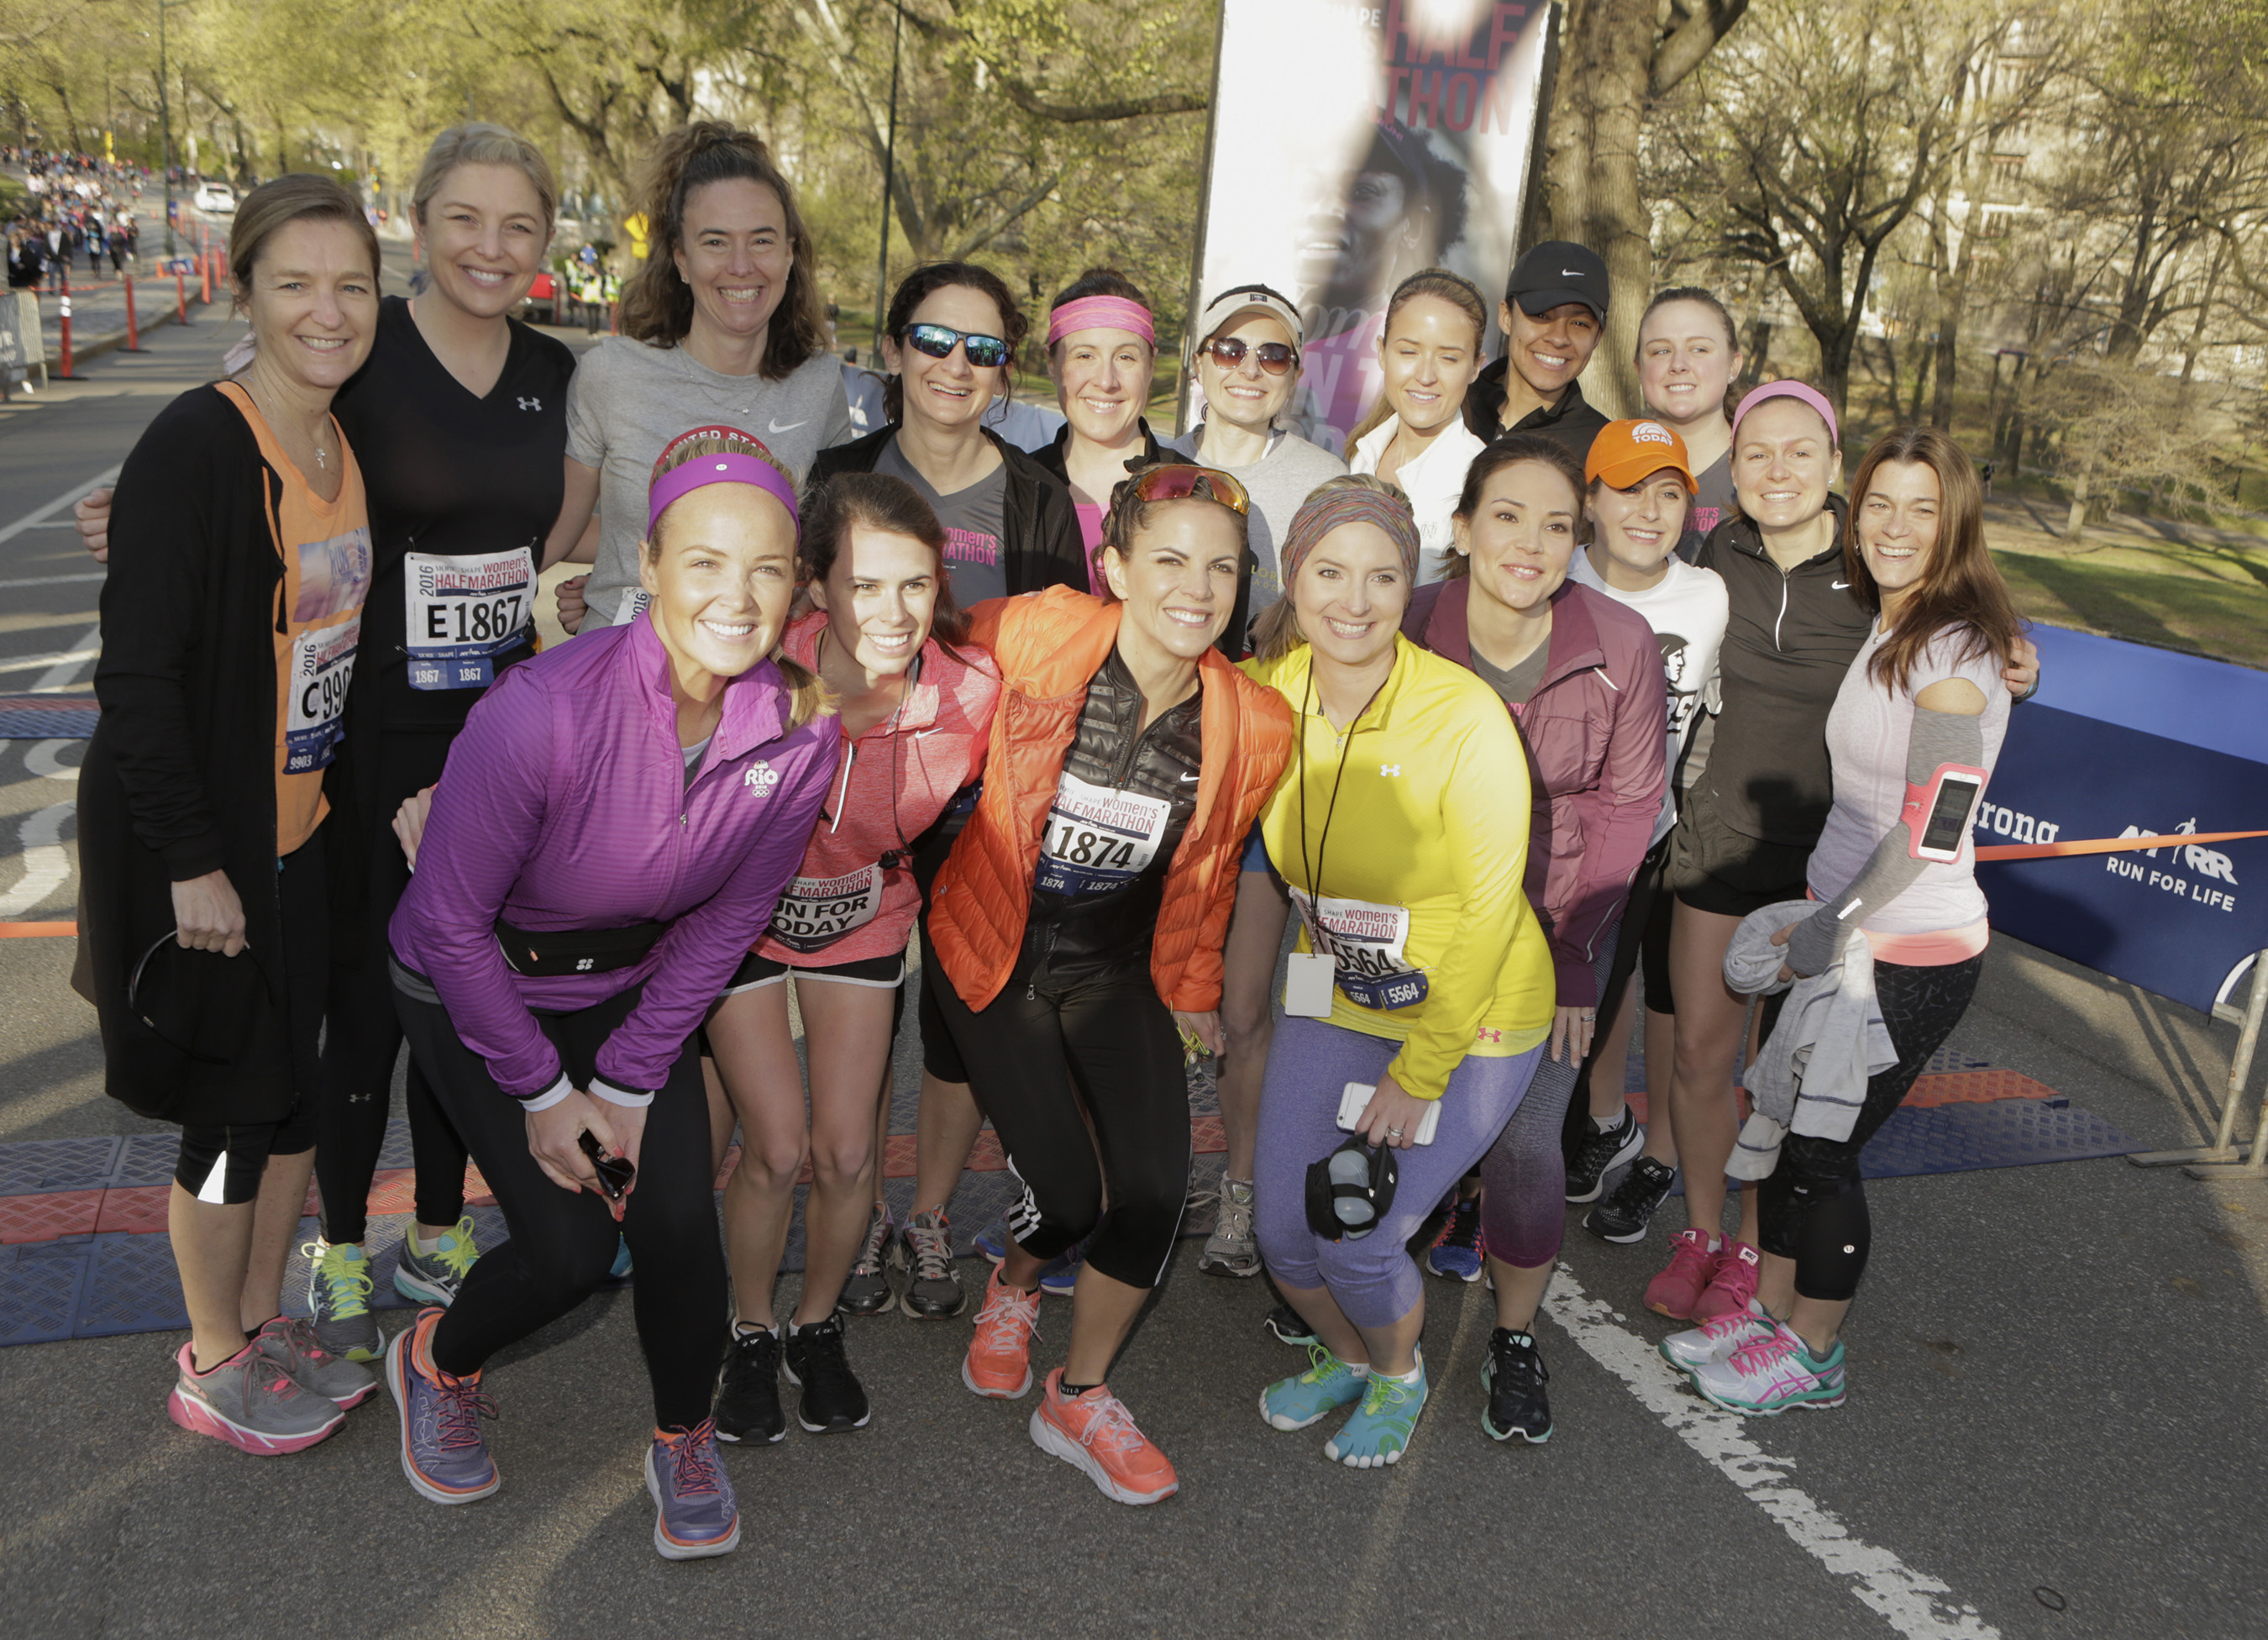 “Run for TODAY” and NBC Olympics team members get ready to run the 13th Annual MORE/SHAPE Women’s Half-Marathon in New York’s Central Park on April 17, 2016.